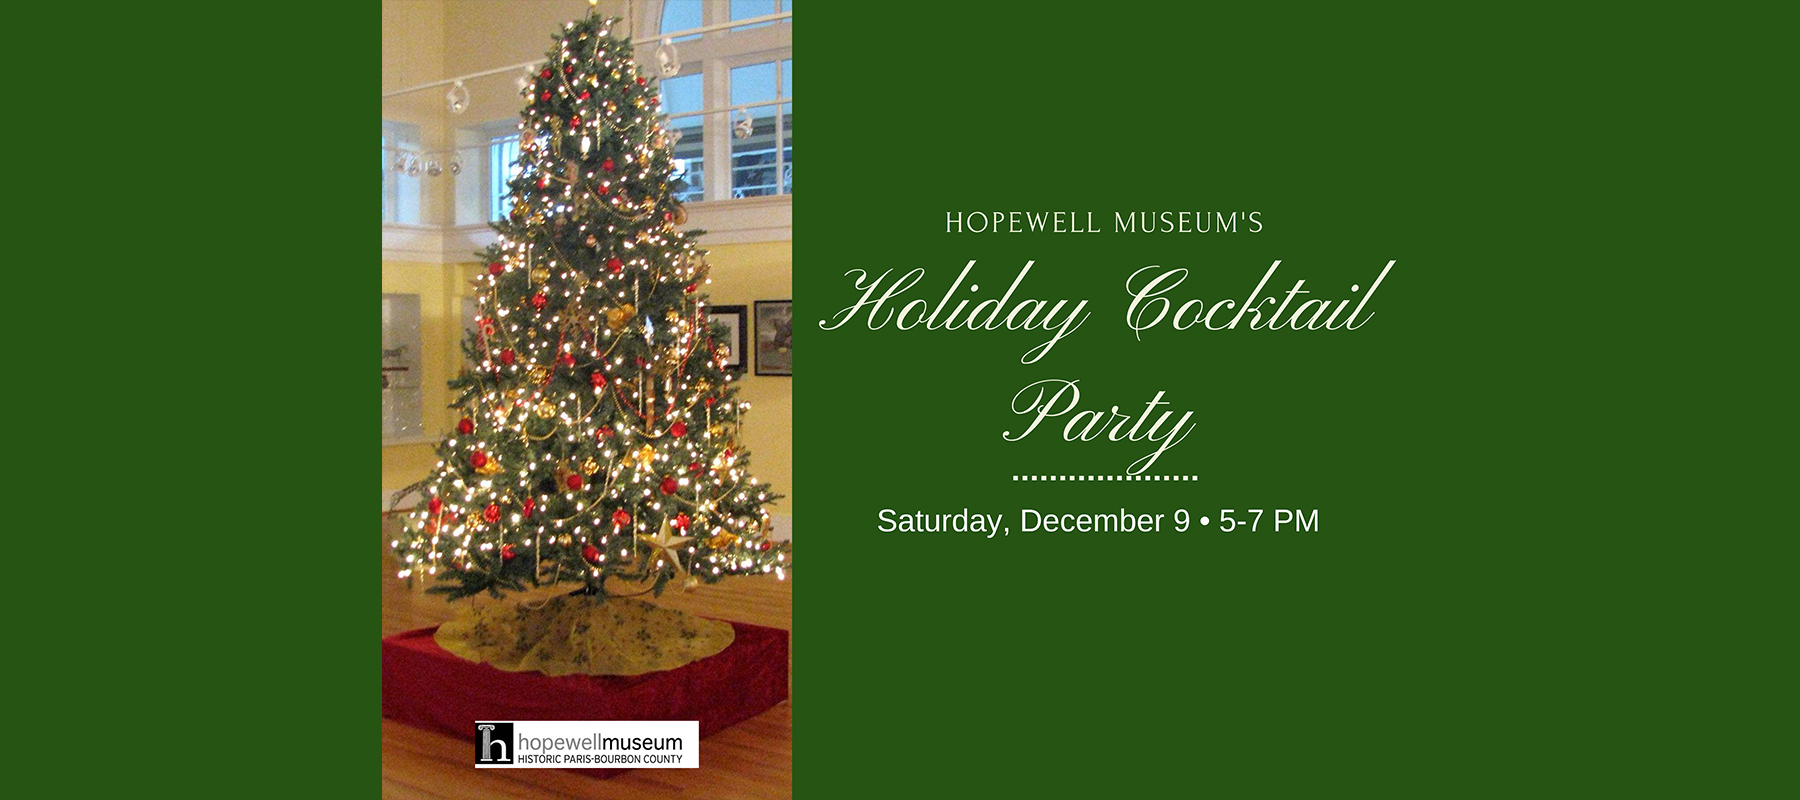 Hopewell Museum's Holiday Cocktail Party Saturday, December 9th 5-7pm Christmas tree in museum